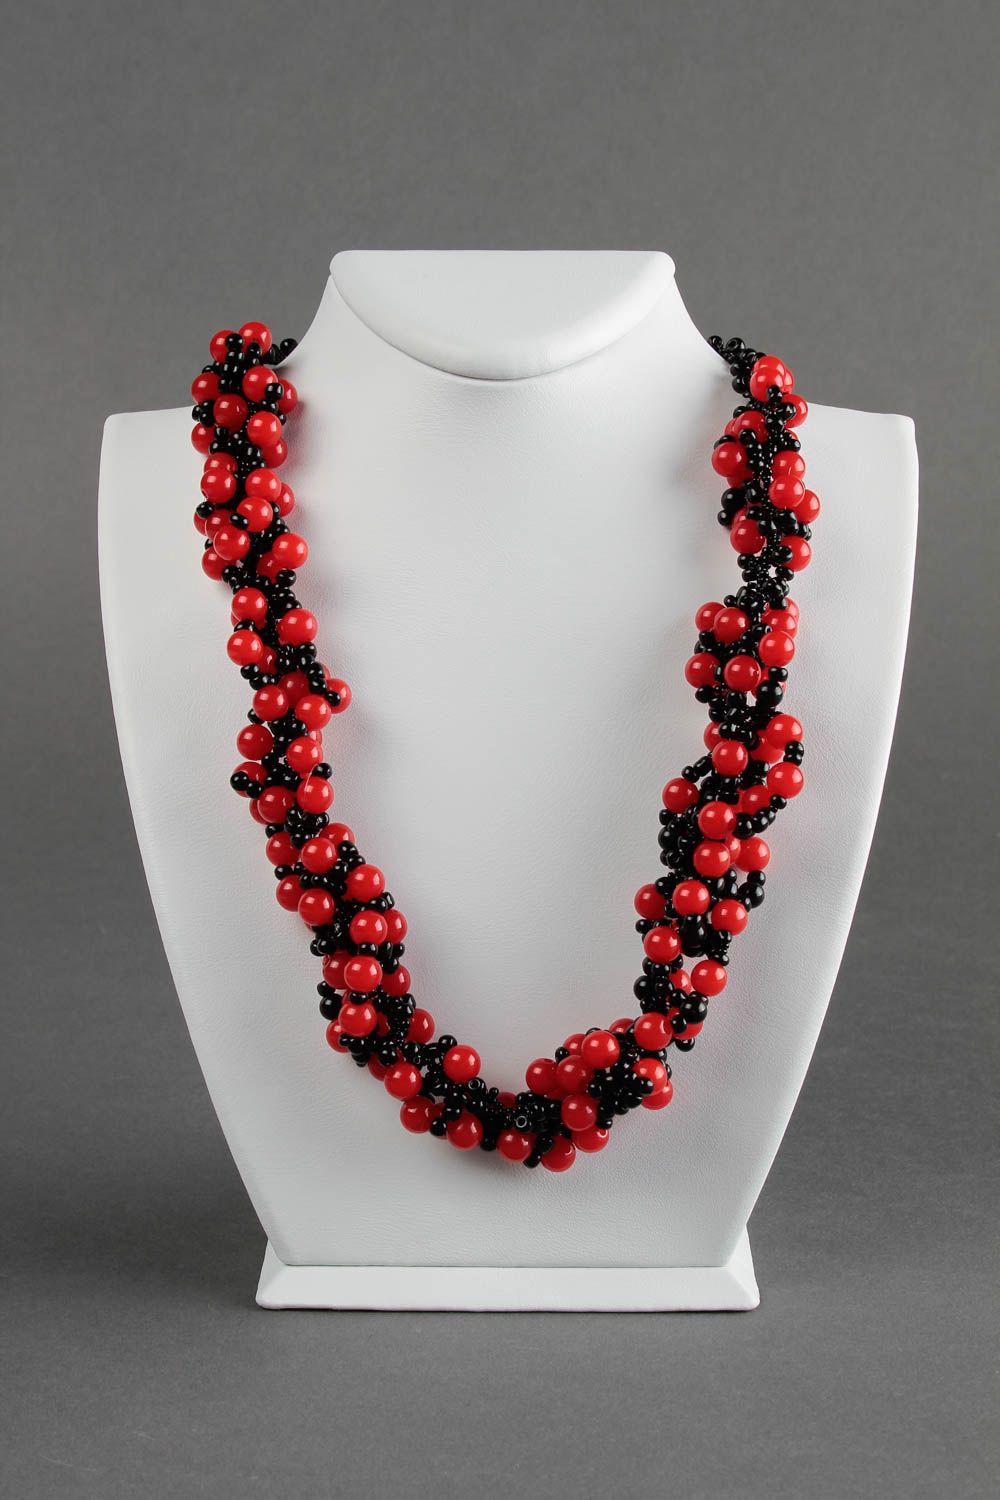 Handmade beautiful beaded necklace red and black necklace evening jewelry photo 5